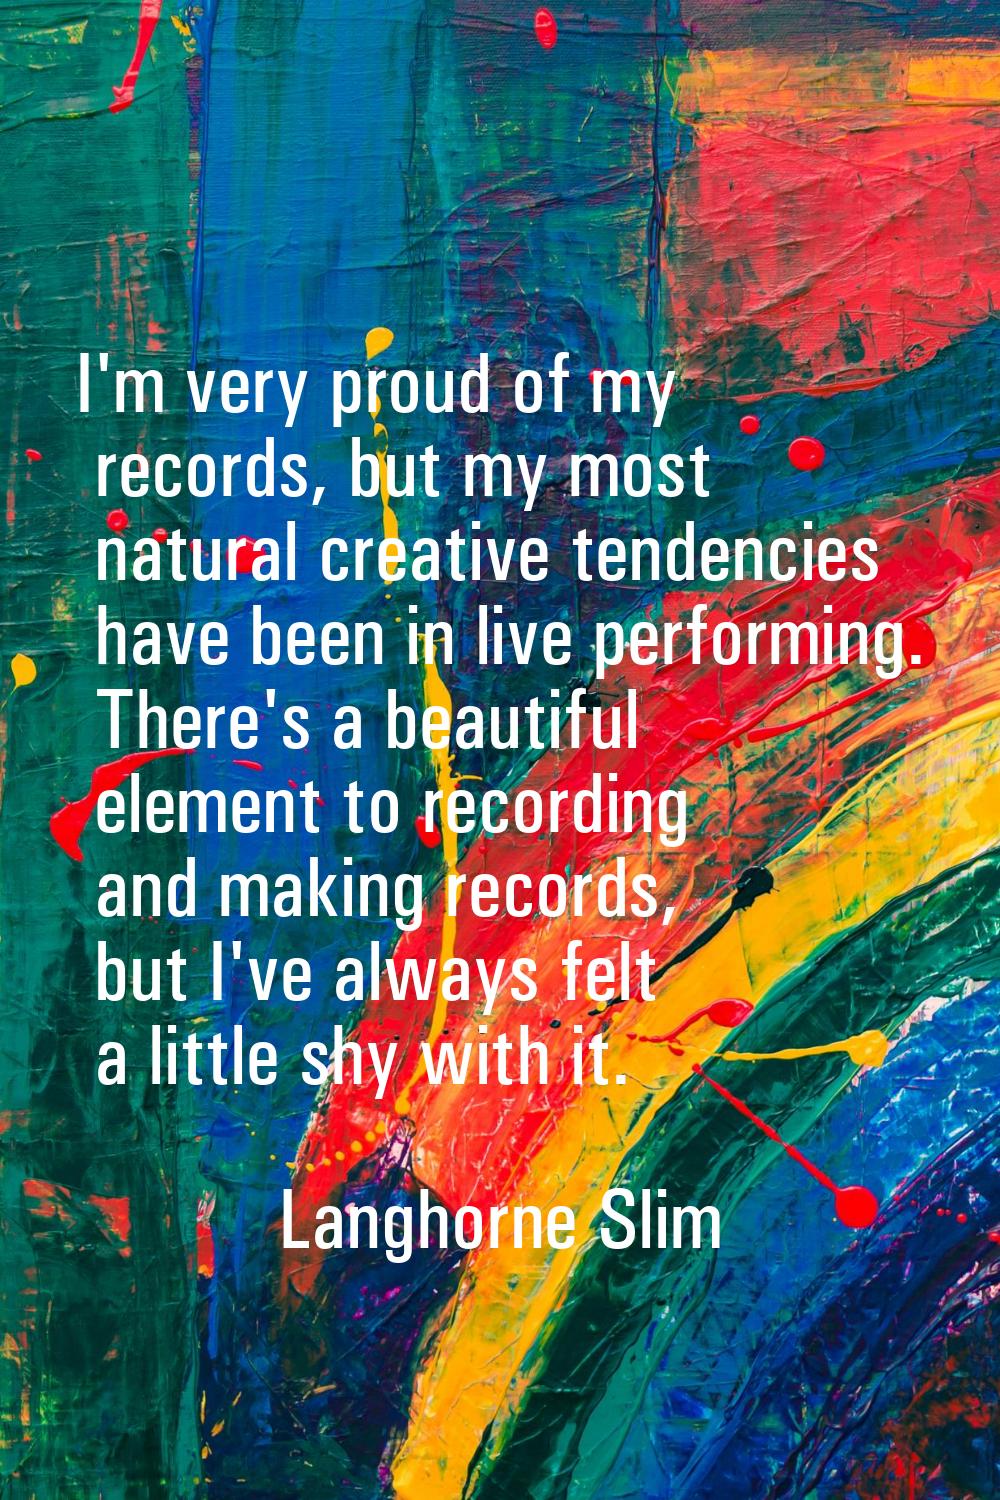 I'm very proud of my records, but my most natural creative tendencies have been in live performing.